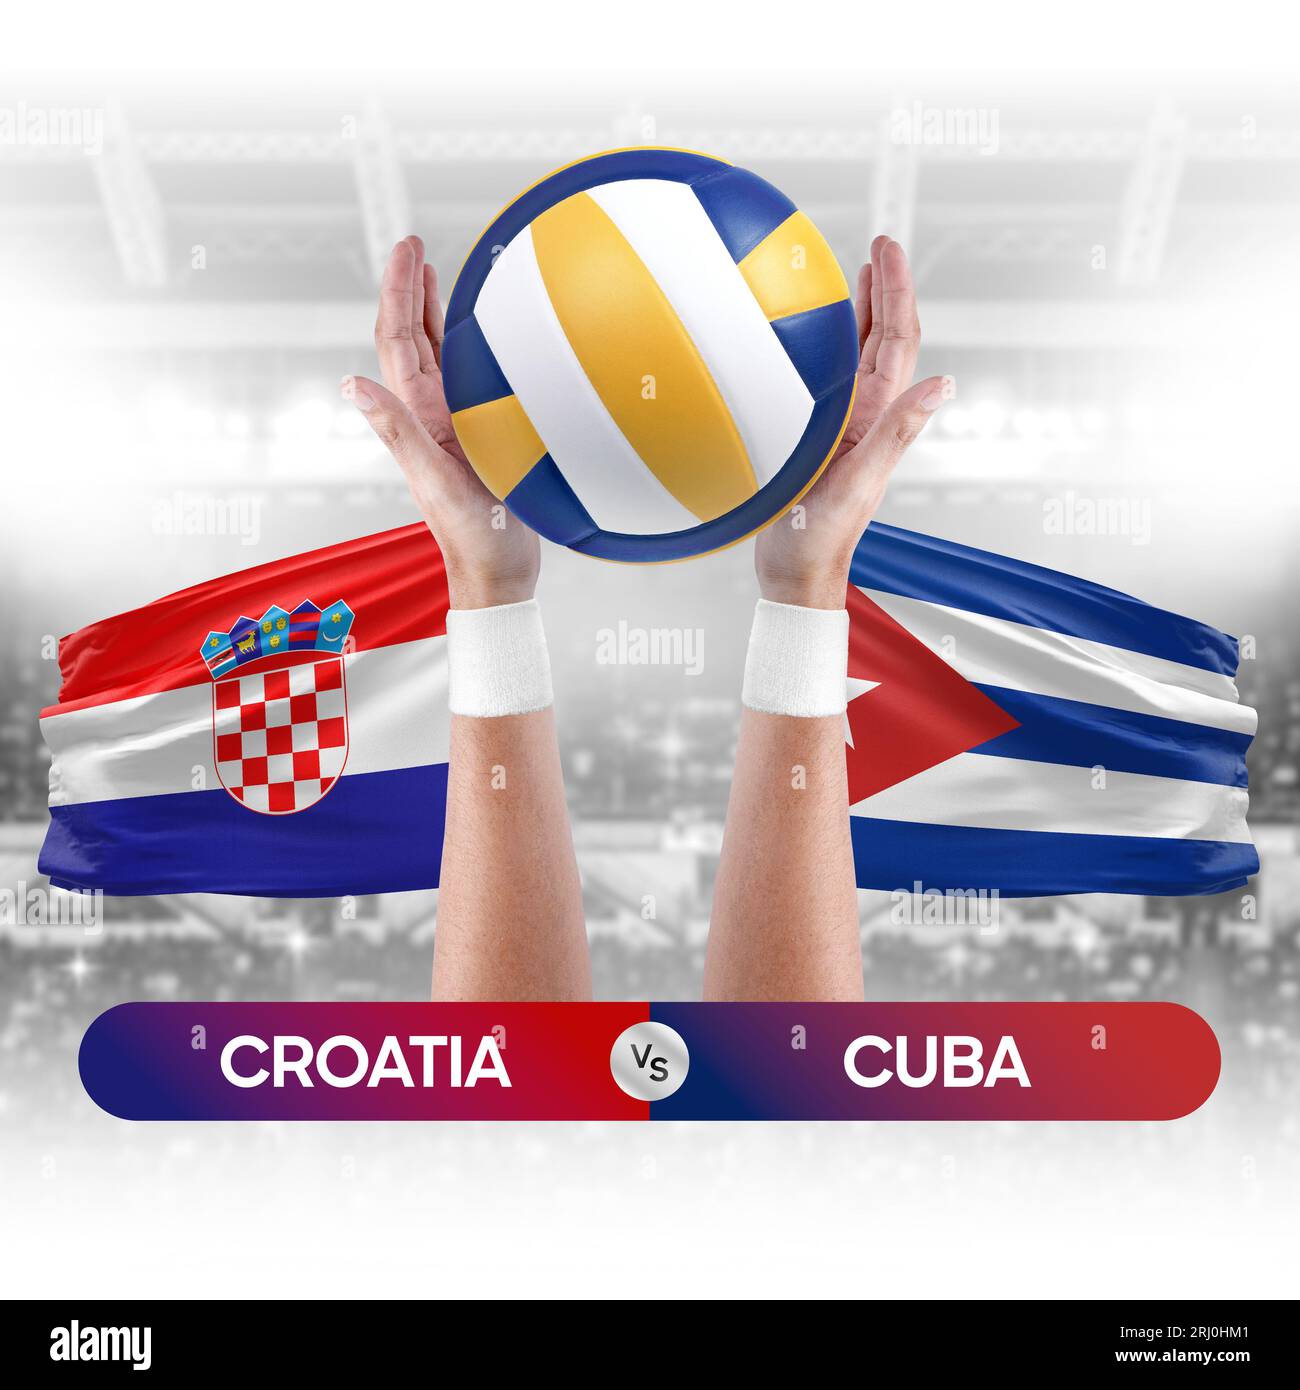 Croatia vs Cuba national teams volleyball volley ball match competition concept. Stock Photo